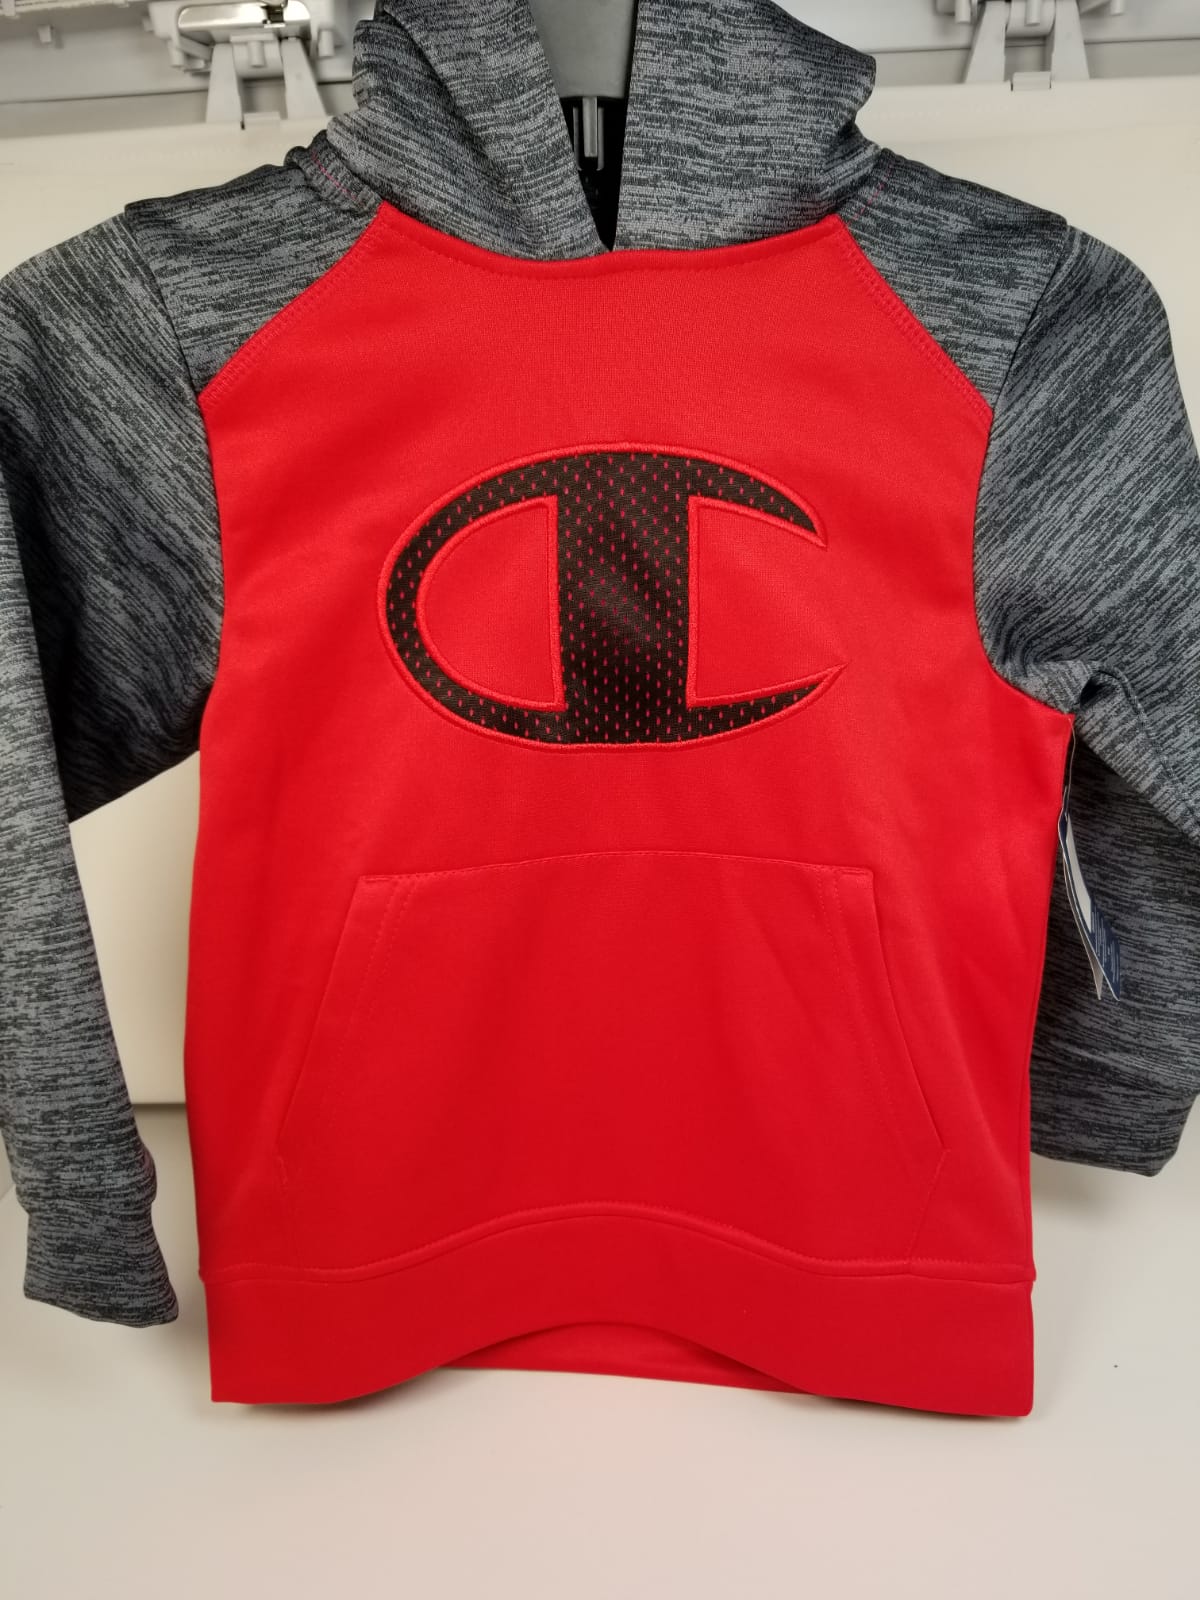 champion sweaters for boys